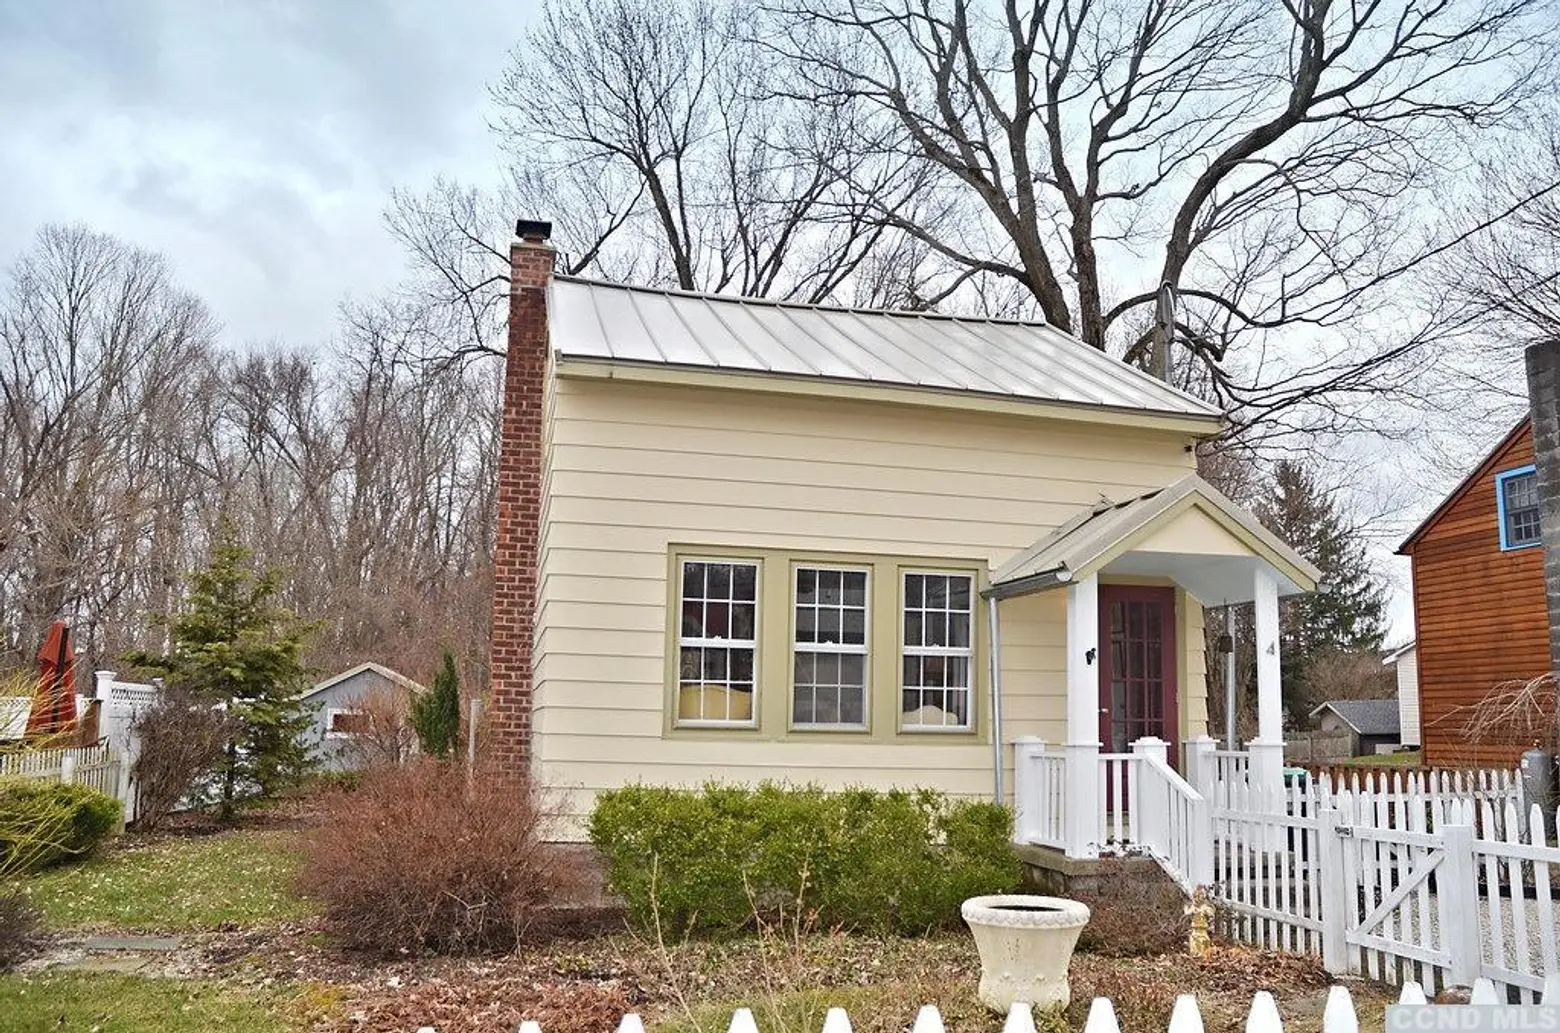 This quaint worker’s cottage could be your upstate retreat for just $165K